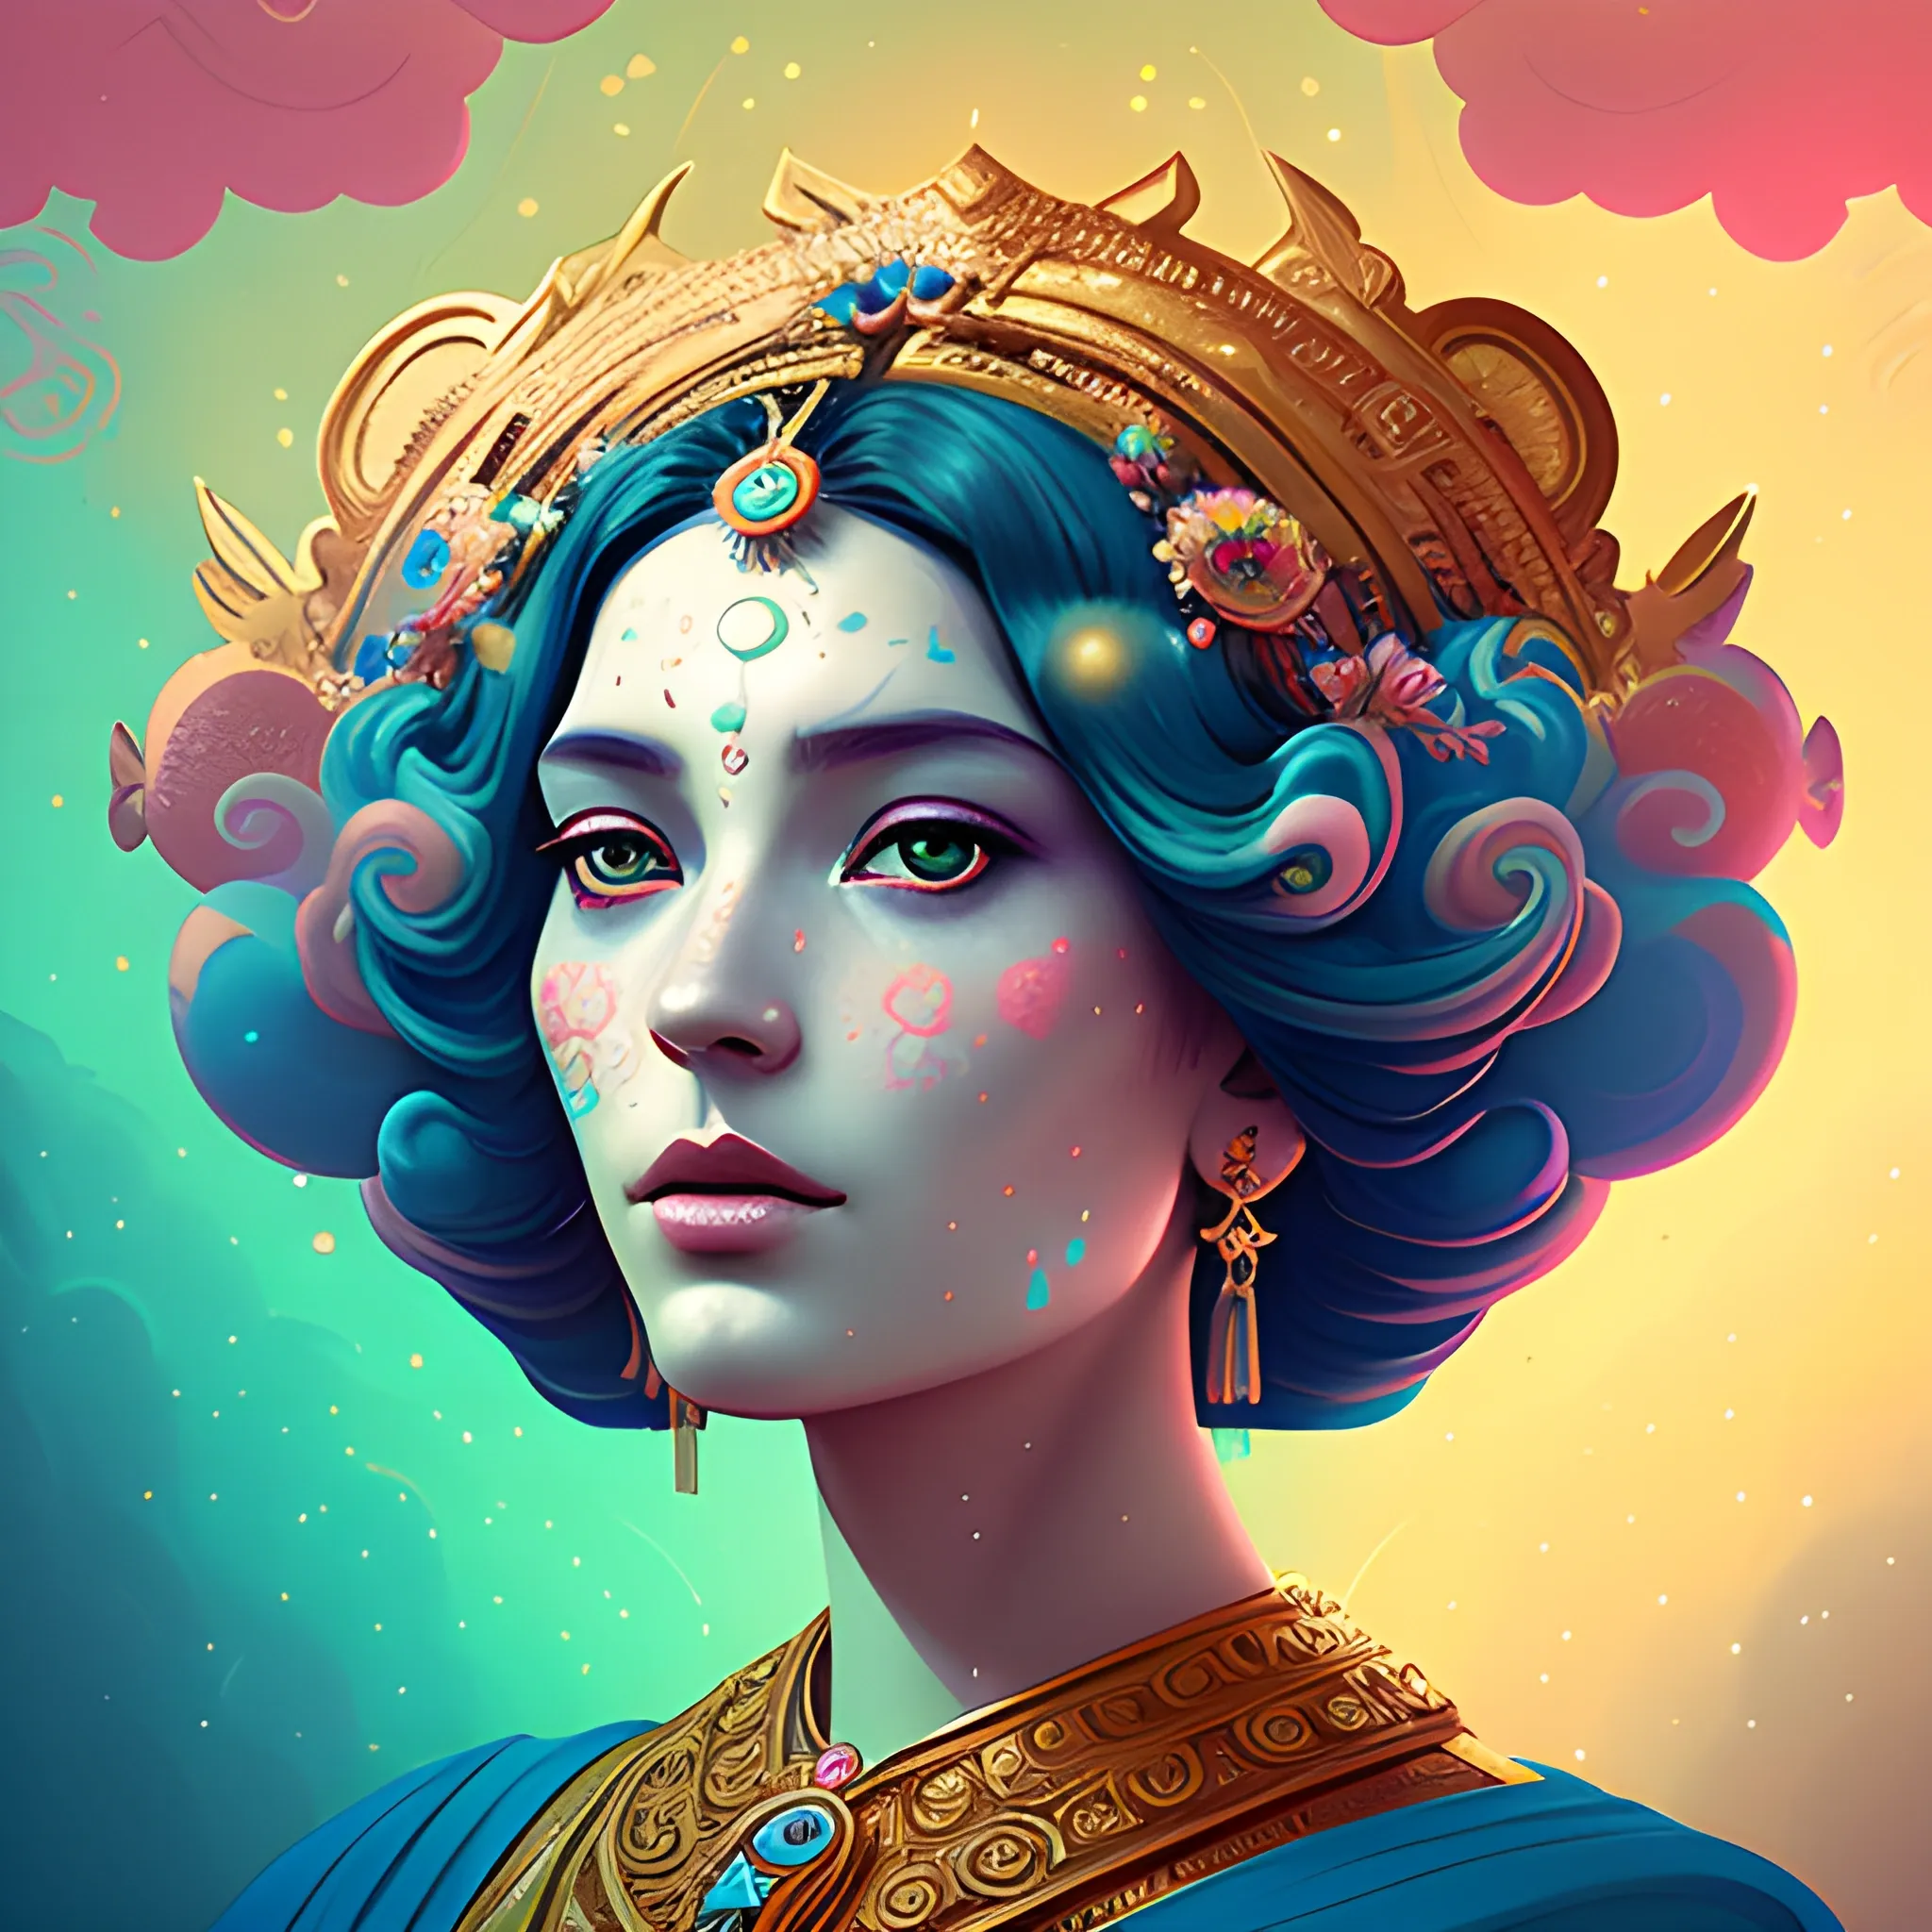 Flowery beautiful face empress or priestess  with gold jewellery, by petros afshar, ross tran, Tom Bagshaw, tom whalen, underwater bubbly psychedelic clouds, Anaglyph 3D lens blur effect